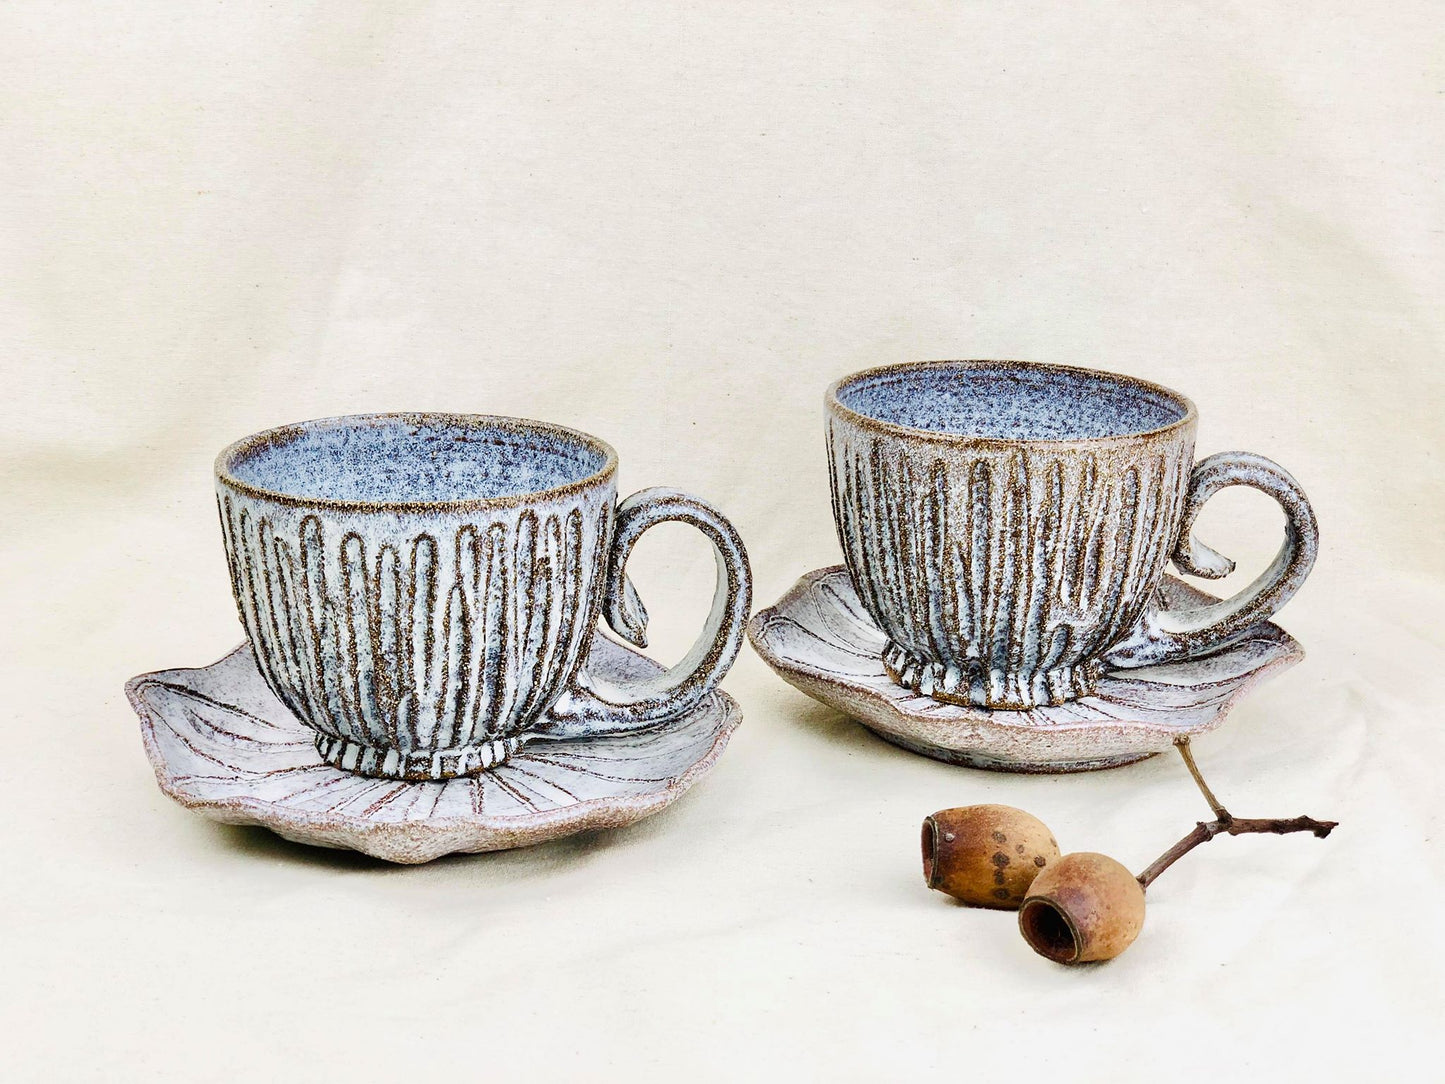 Poppy Seed Head Cup and Saucer